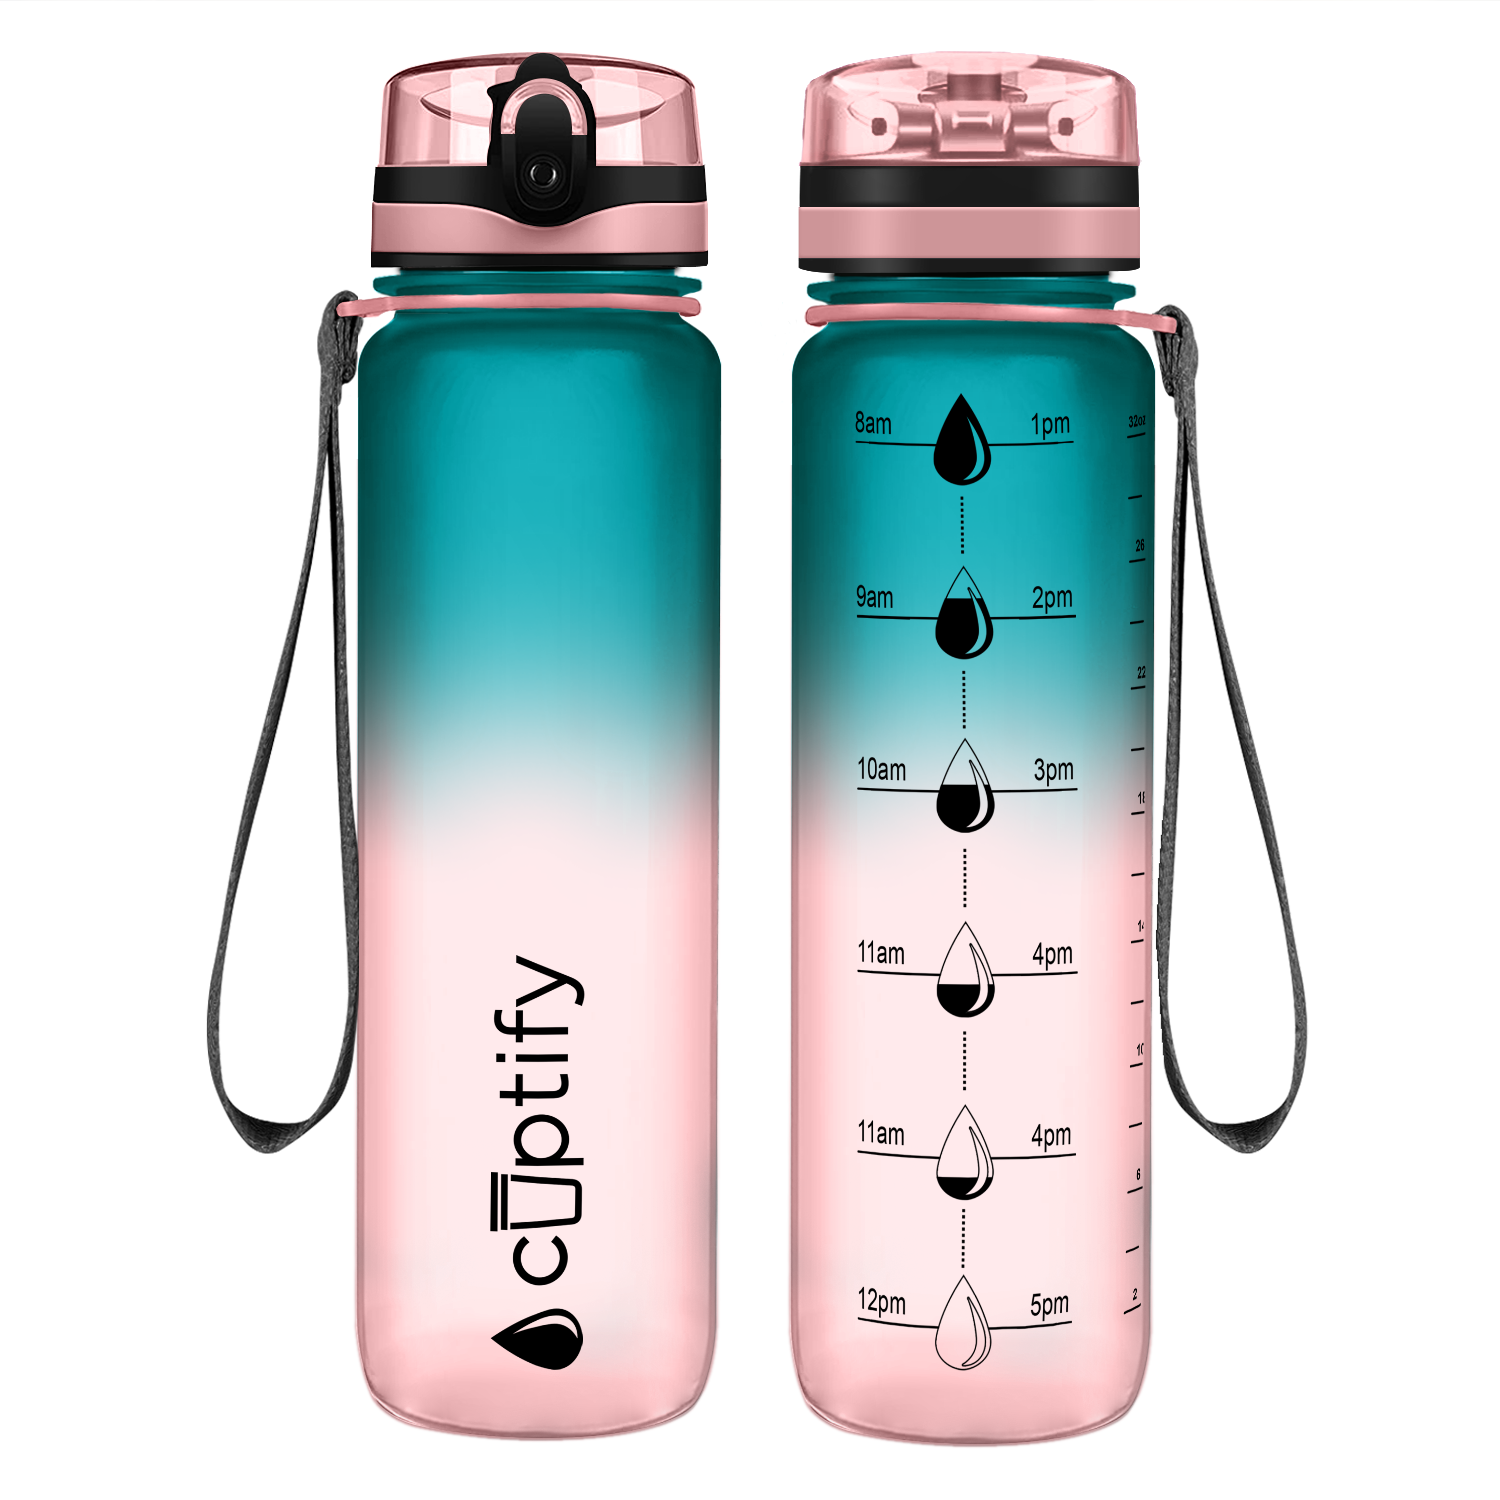 Cuptify Cotton Candy Frosted Hydration Tracker Water Bottle